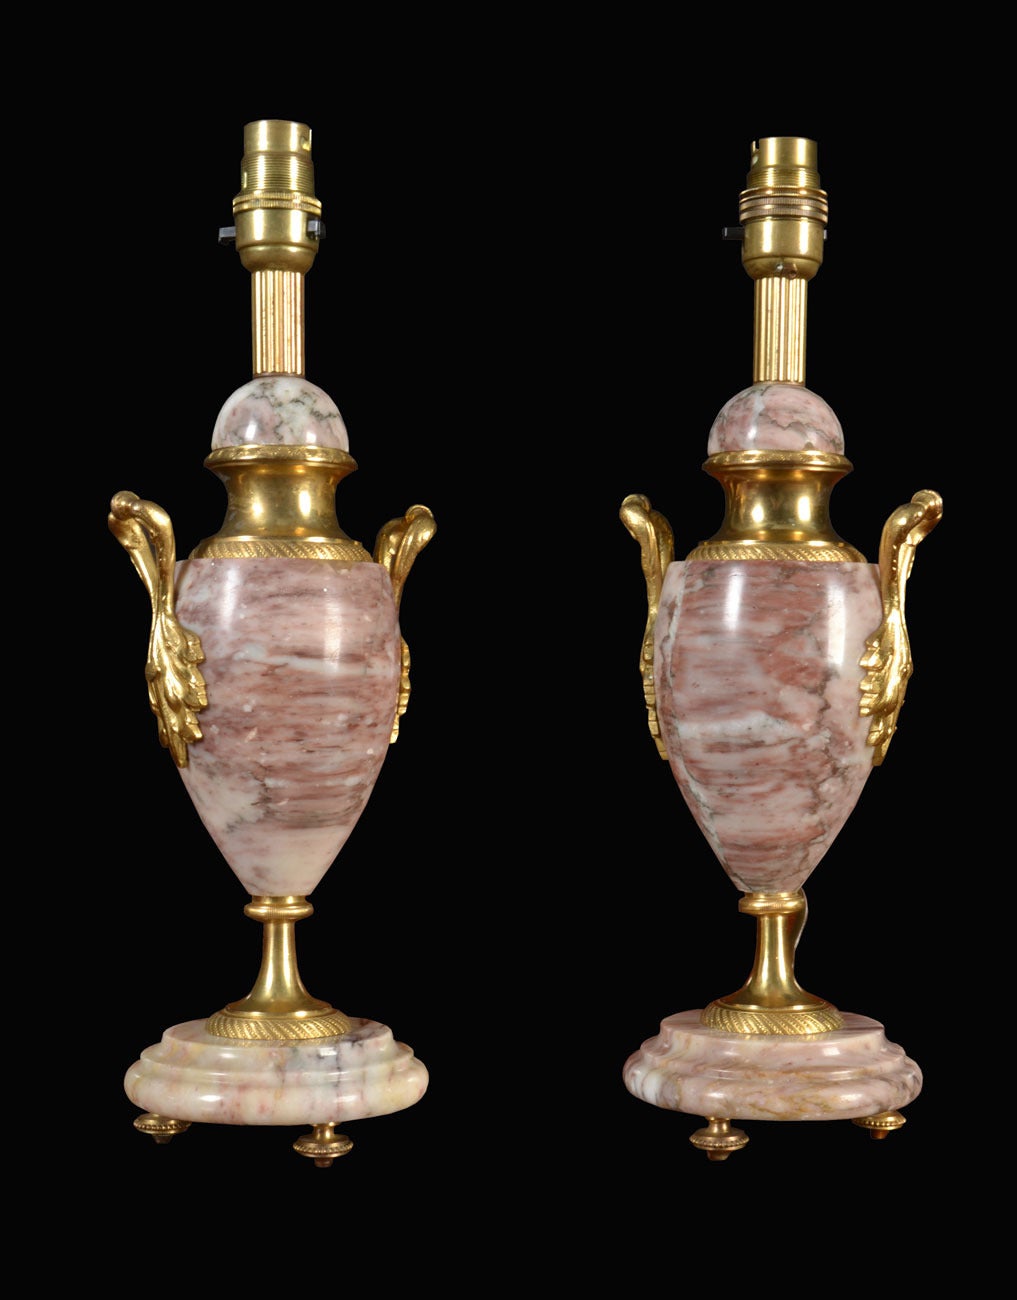 Pair of gilt metal mounted veined marble mantel lamps Of urn form, having foliated mounts on circular stepped bases
(the lamps have been re-wired)